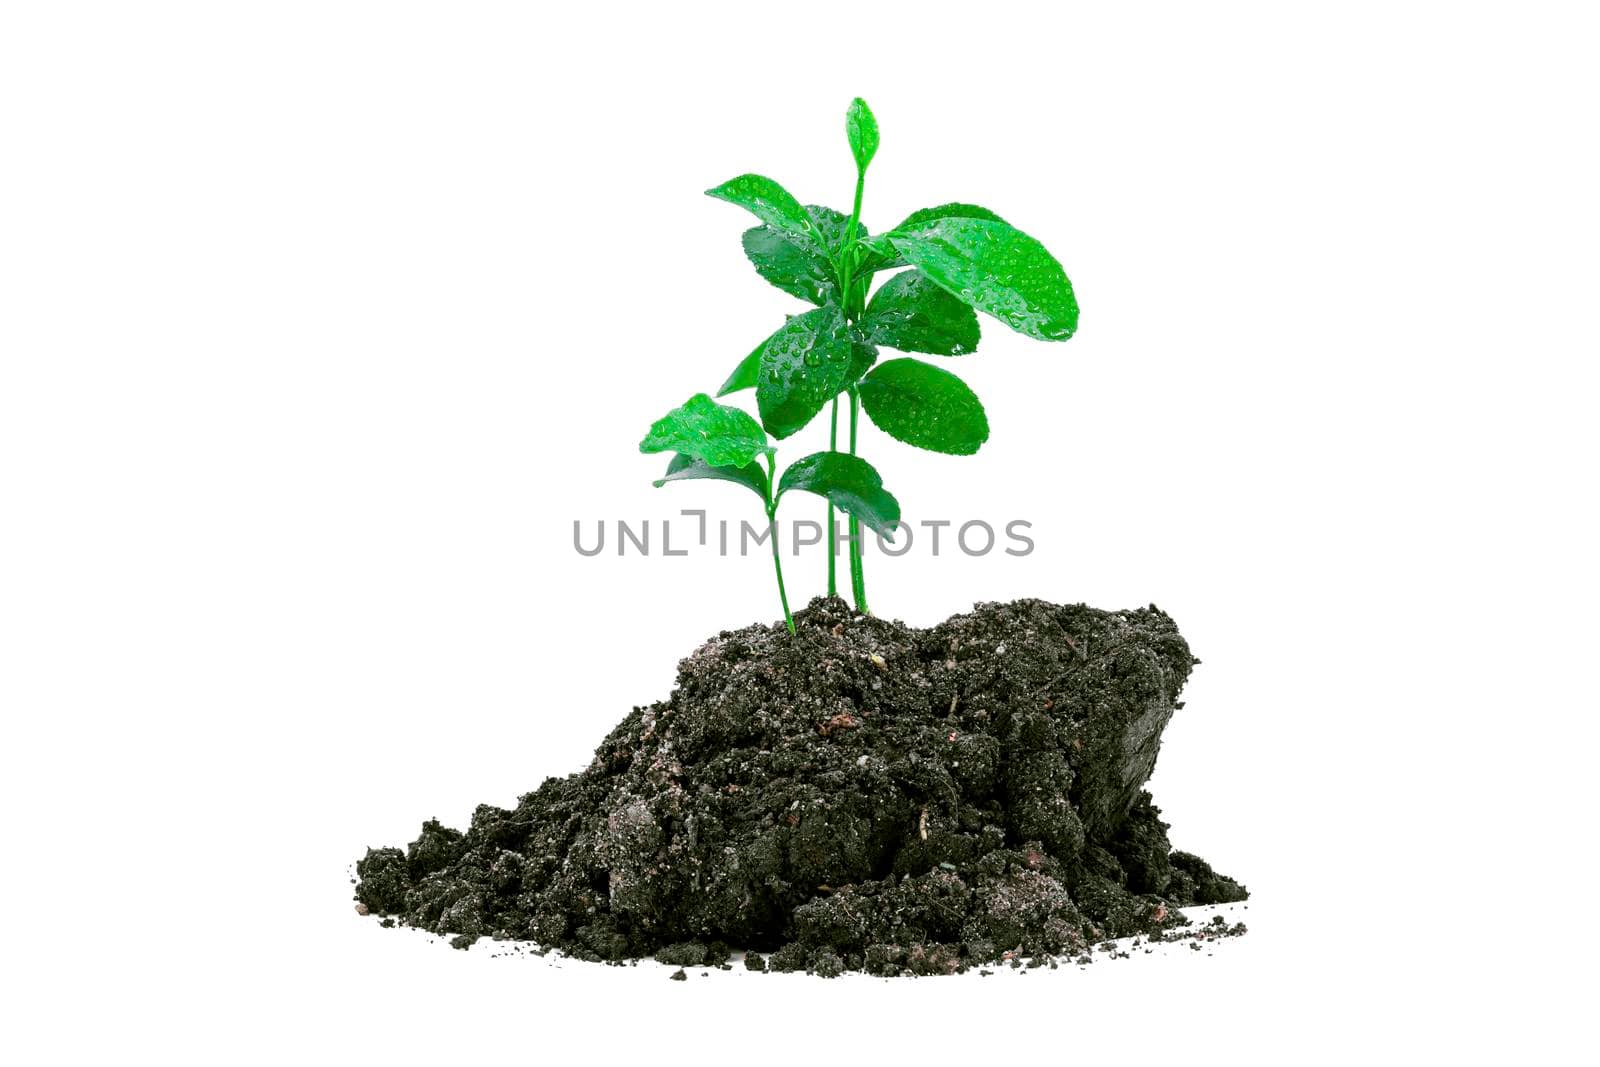 Close-up of a sapling of a tree emerging from a mound isolated on a white background. by wattanaphob